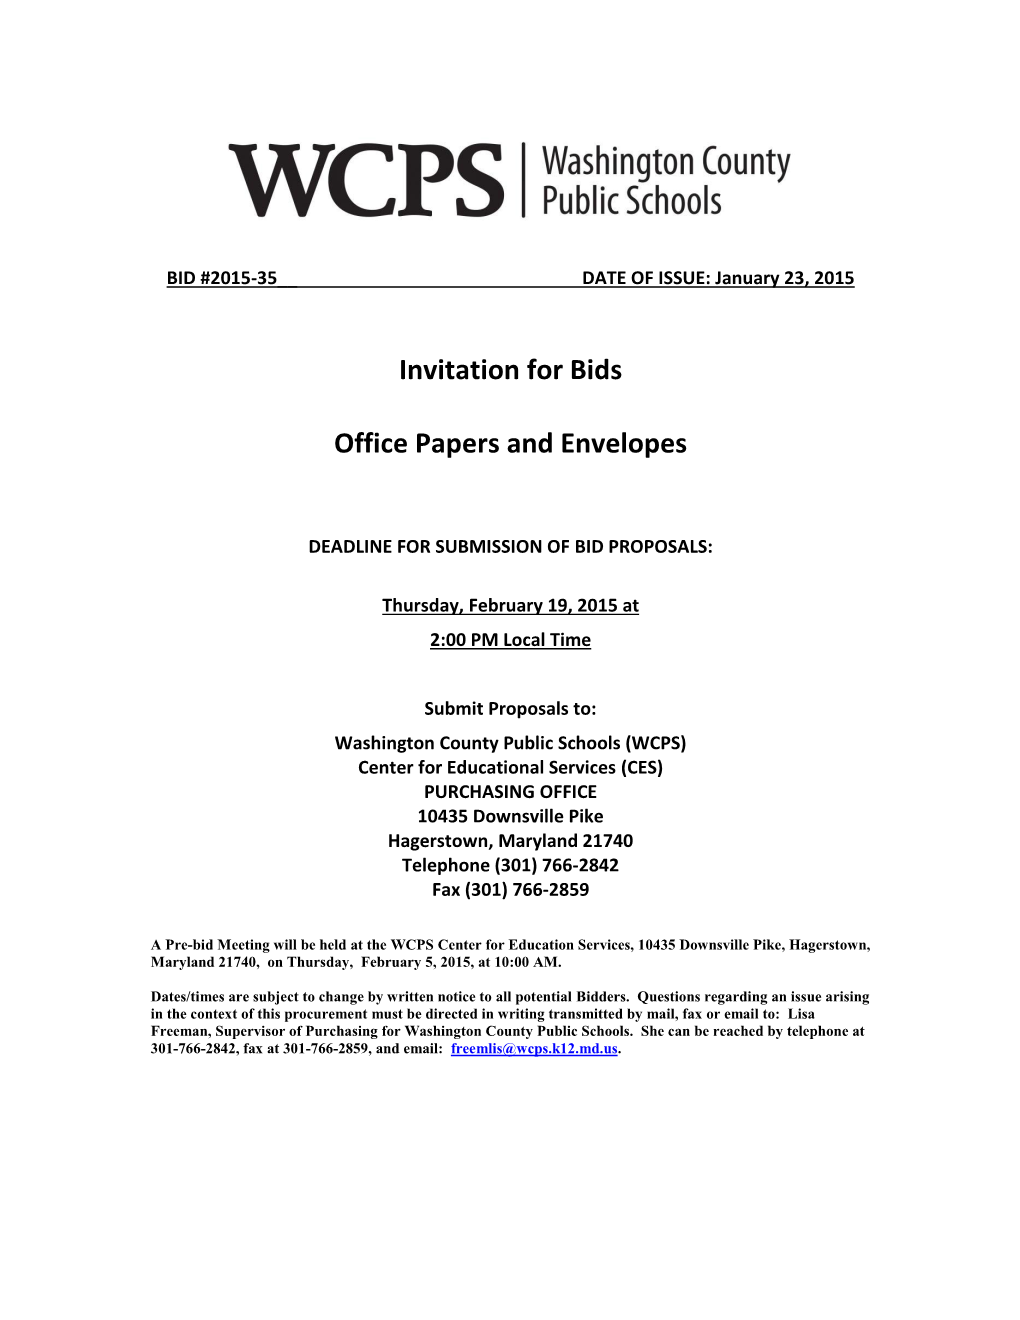 Board of Education of Washington County (“WCBOE”) Is the Legal Entity and Governing Authority That Will Award Any Resulting Contract